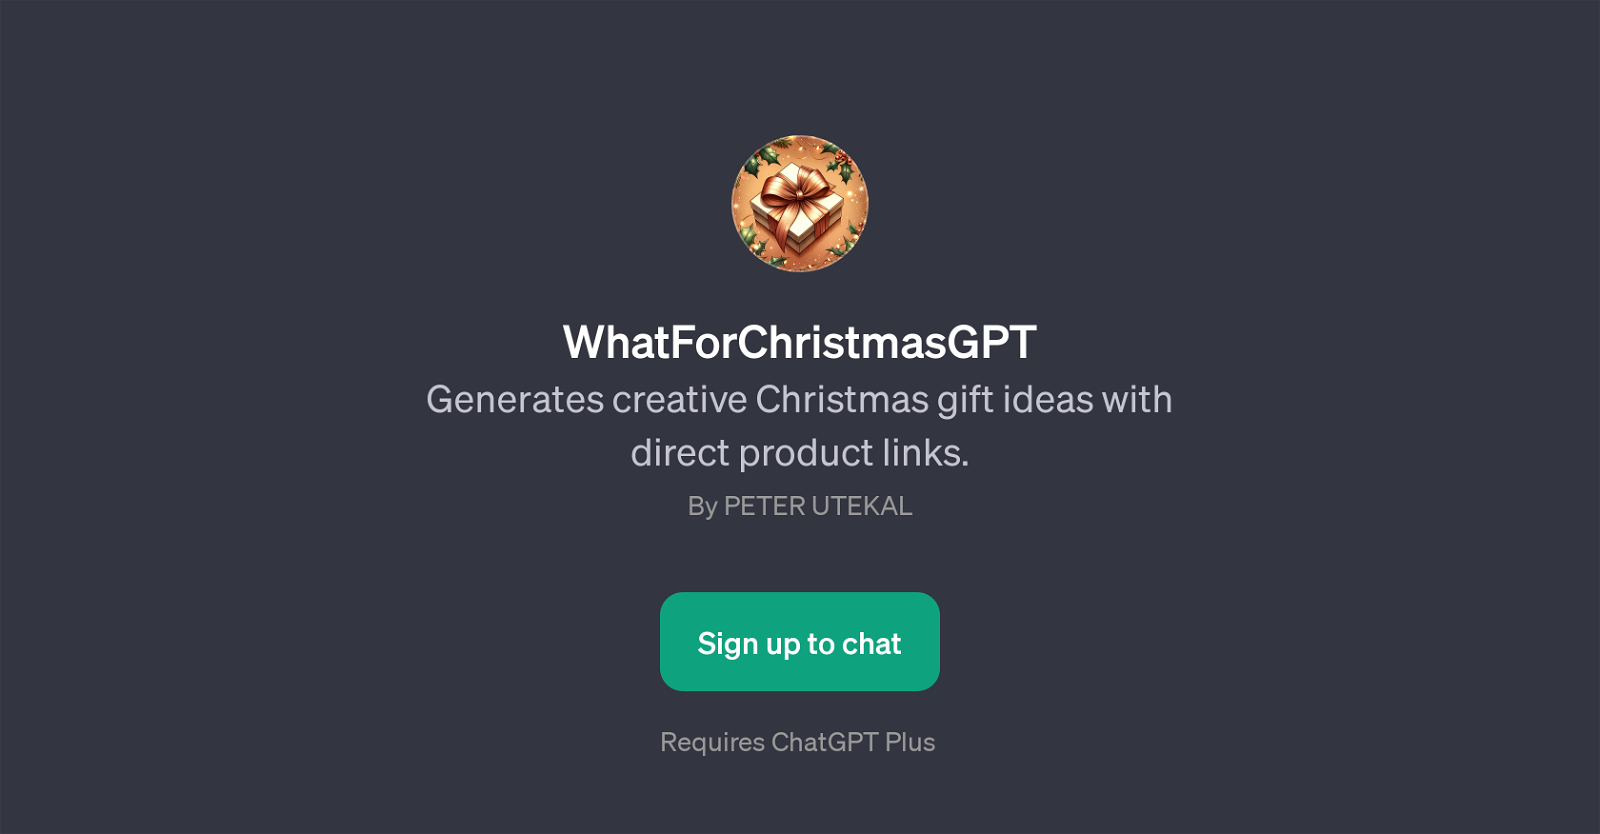 WhatForChristmasGPT website